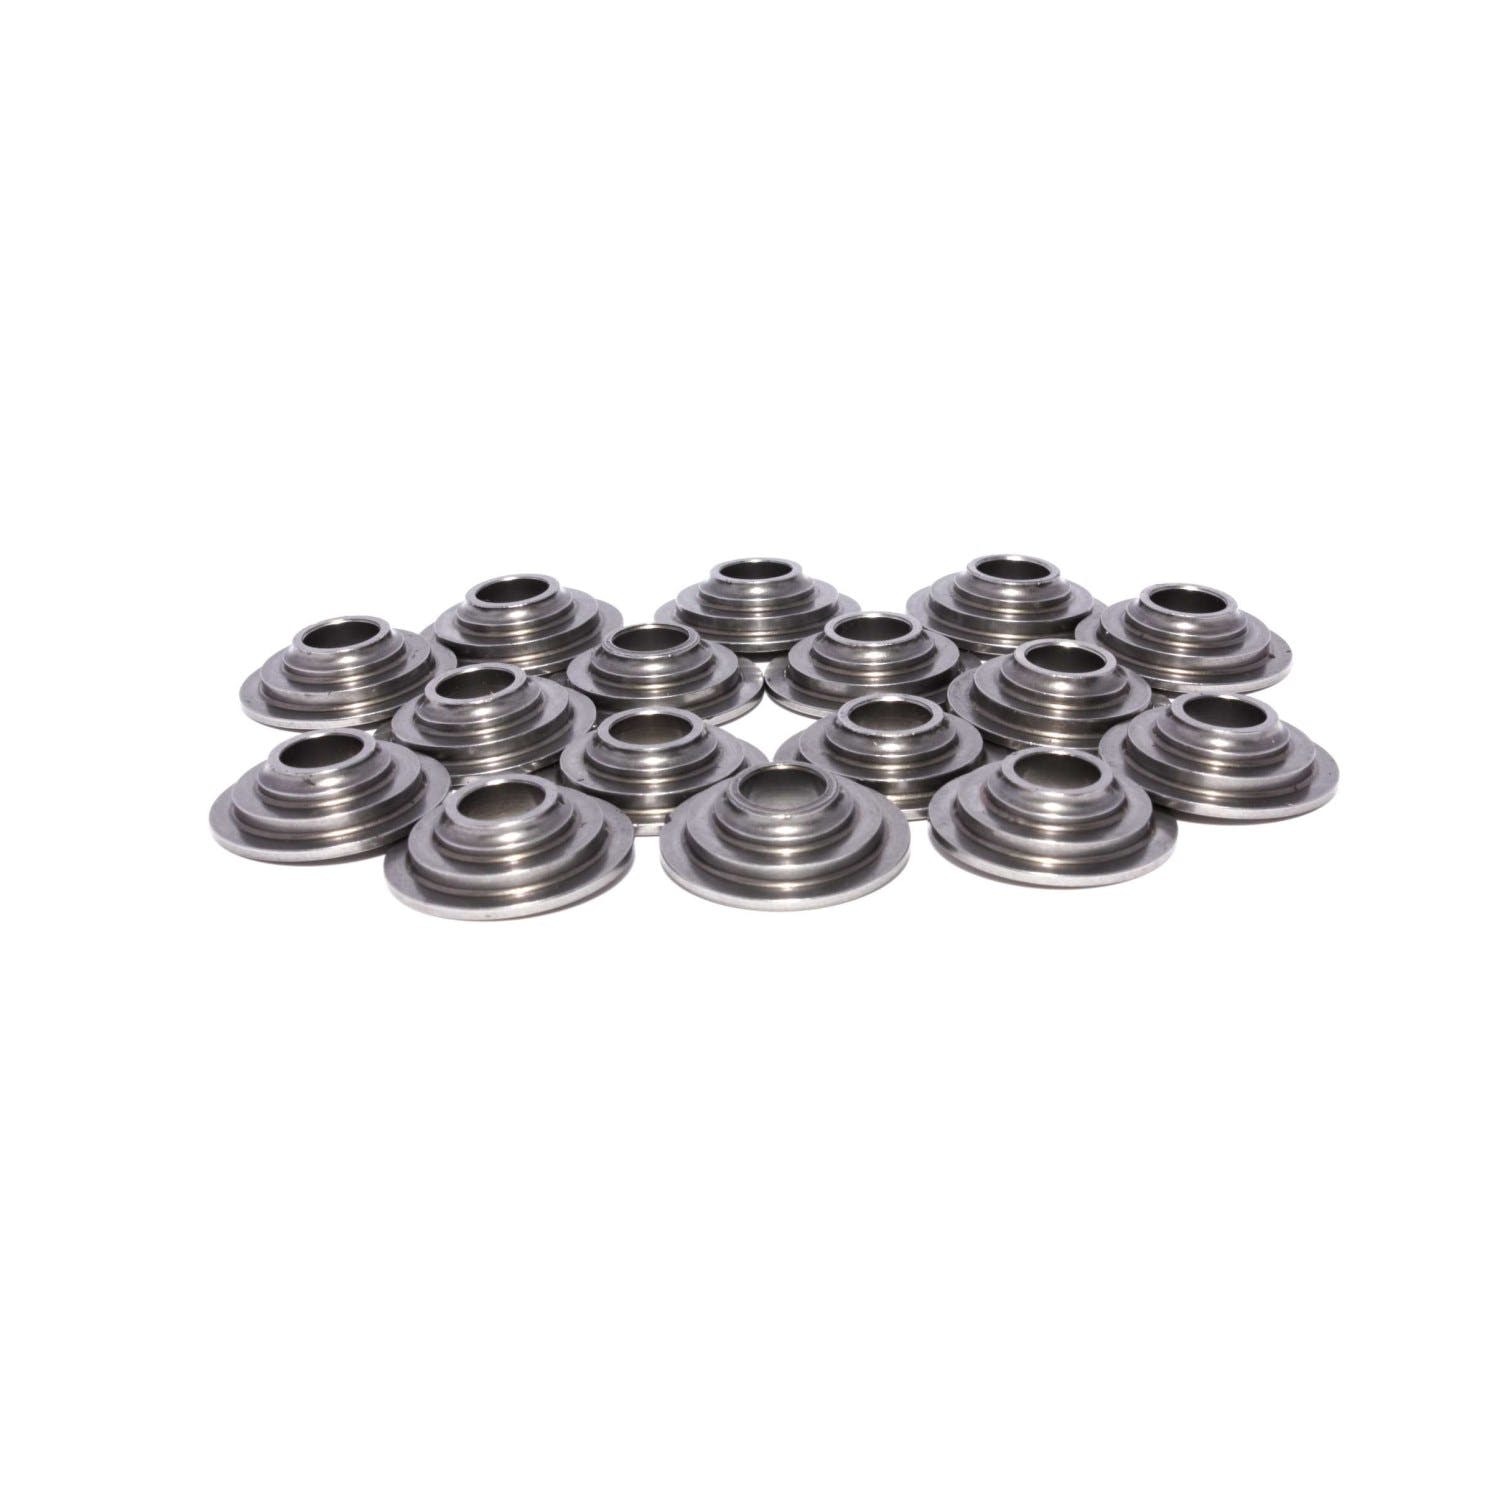 Competition Cams 1738-16 7 Tool Steel Retainer Set of 16 for All Valves w/ 7245 Dual Conical Springs